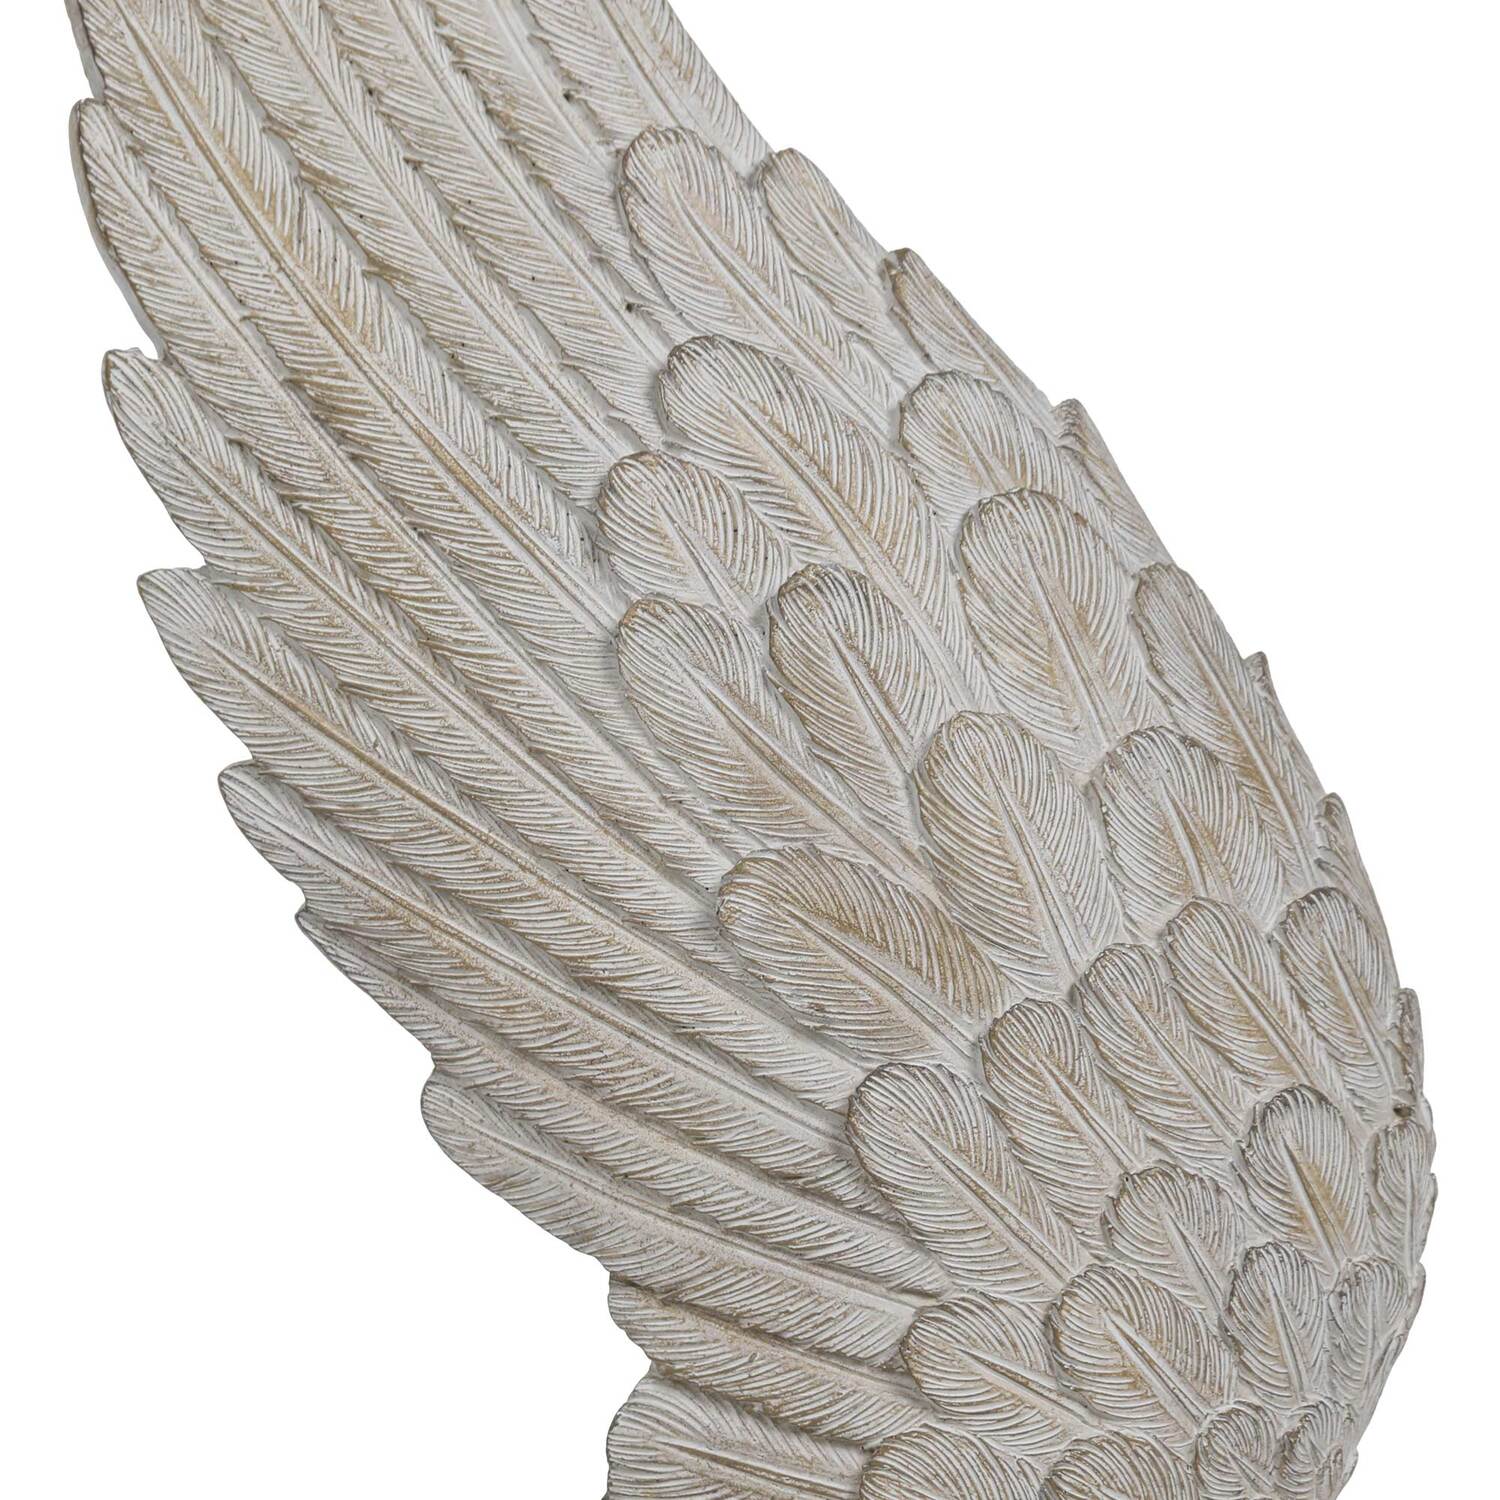 Single Natural Washed Large Angel Wing Ornament in Assorted styles Image 3